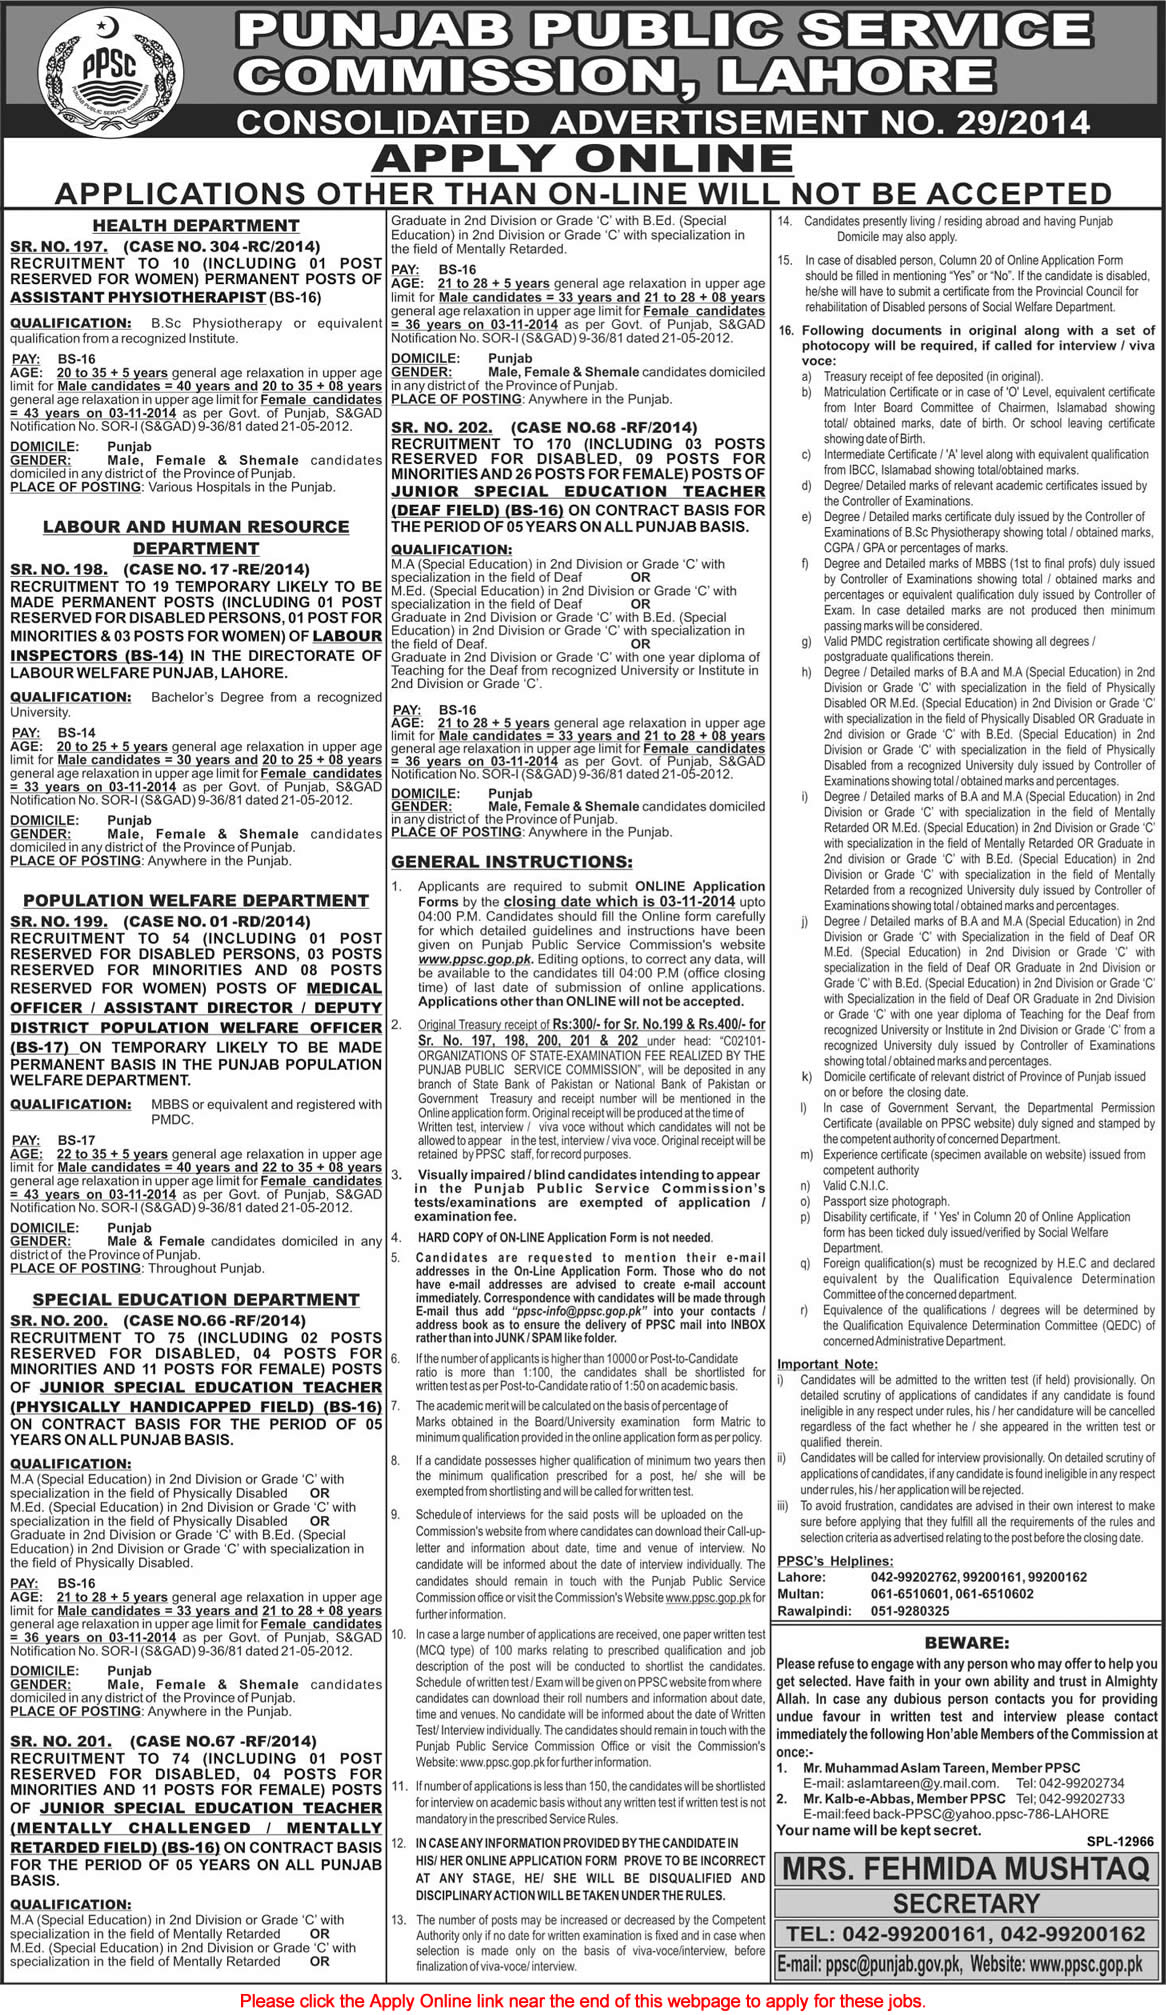 PPSC Jobs October 2014 Latest Consolidated Advertisement No 29/2014